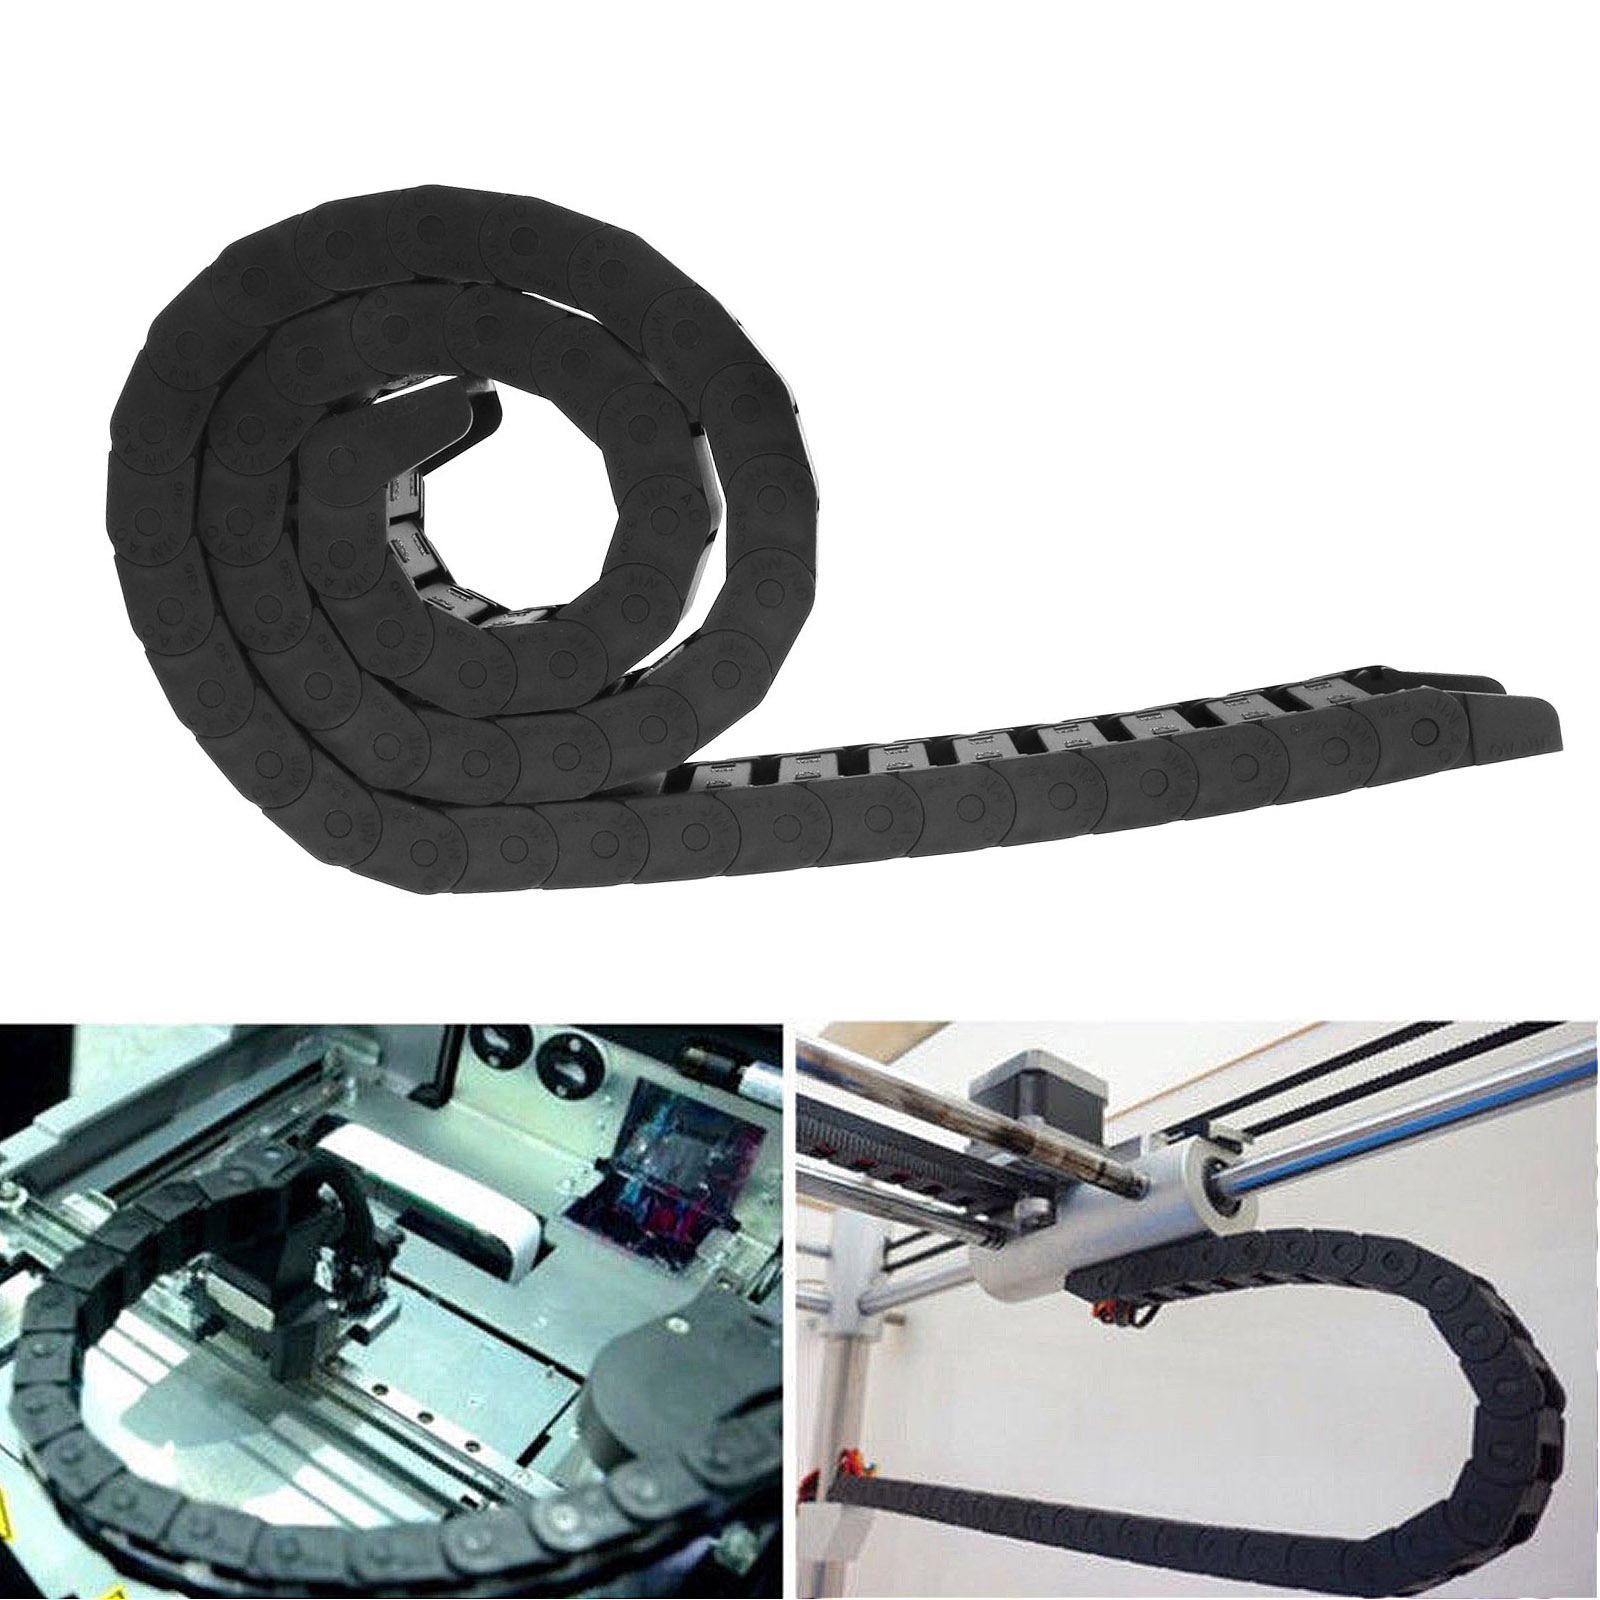 Drag Chain Black Nylon 1m Length Cable Wire Carrier Drag Chain Engraving Machine Accessory high Elasticity and Abrasion Resistance 15mm x 30mm